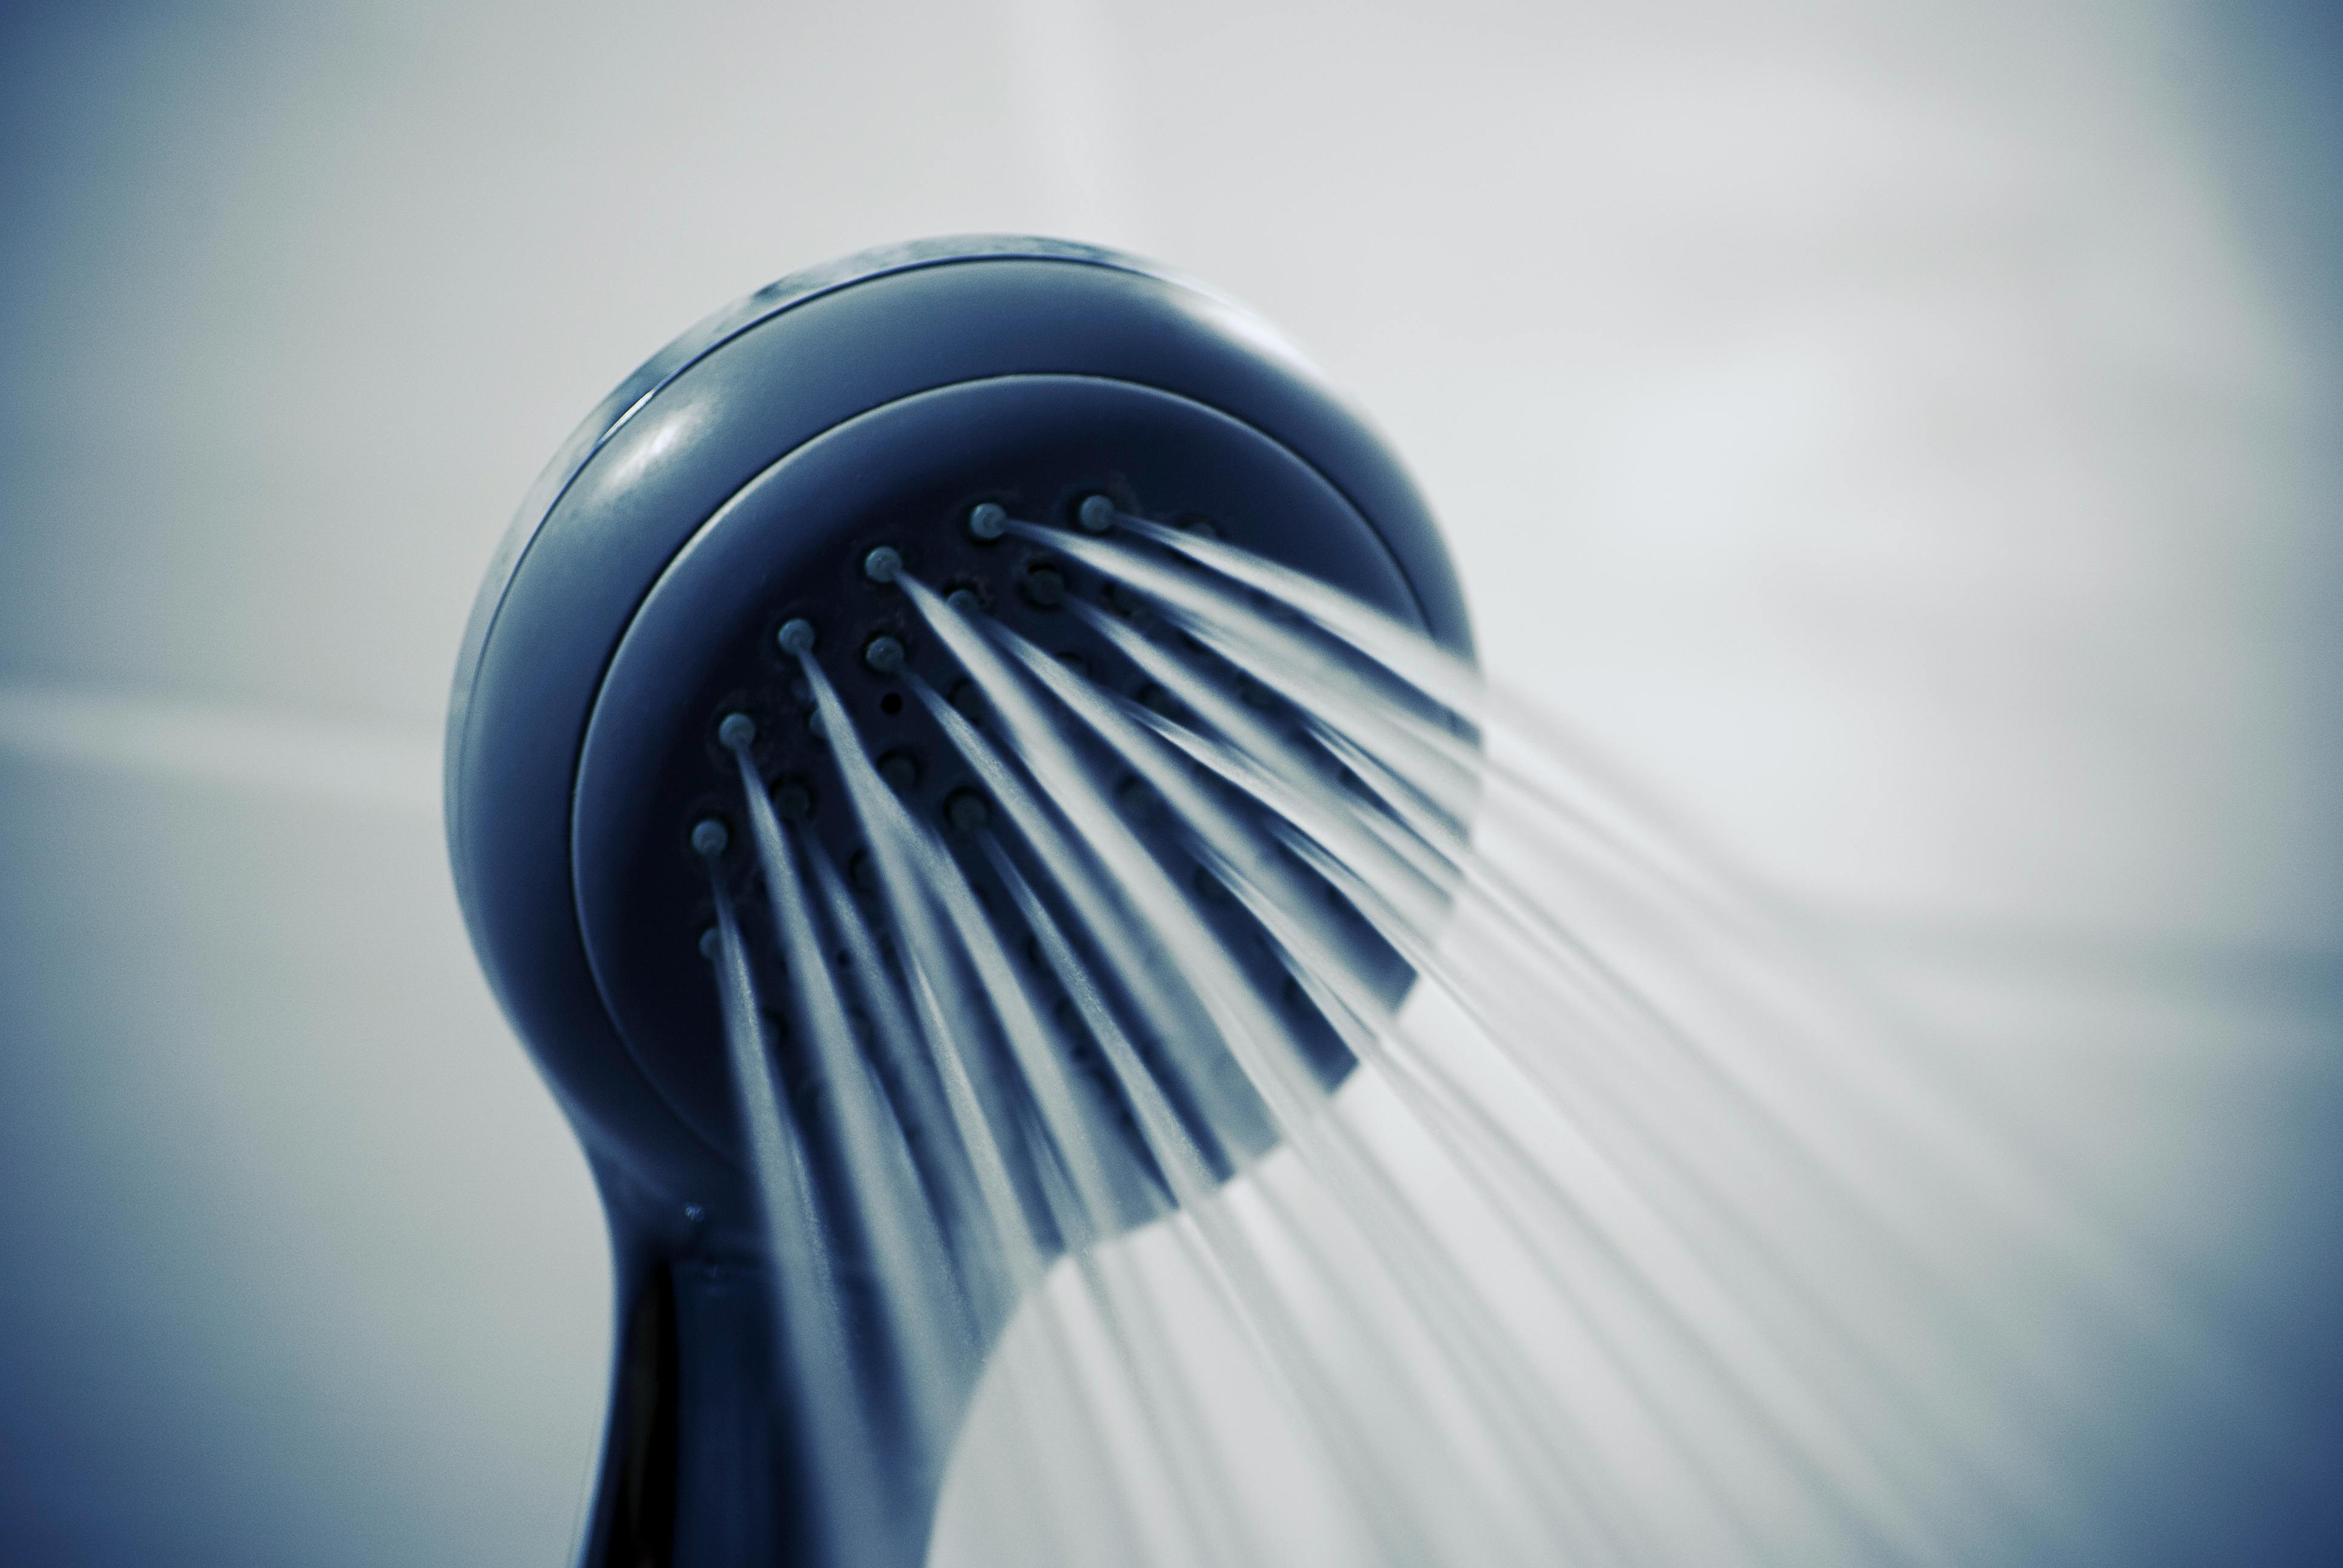 Close-up of shower head with water coming out.